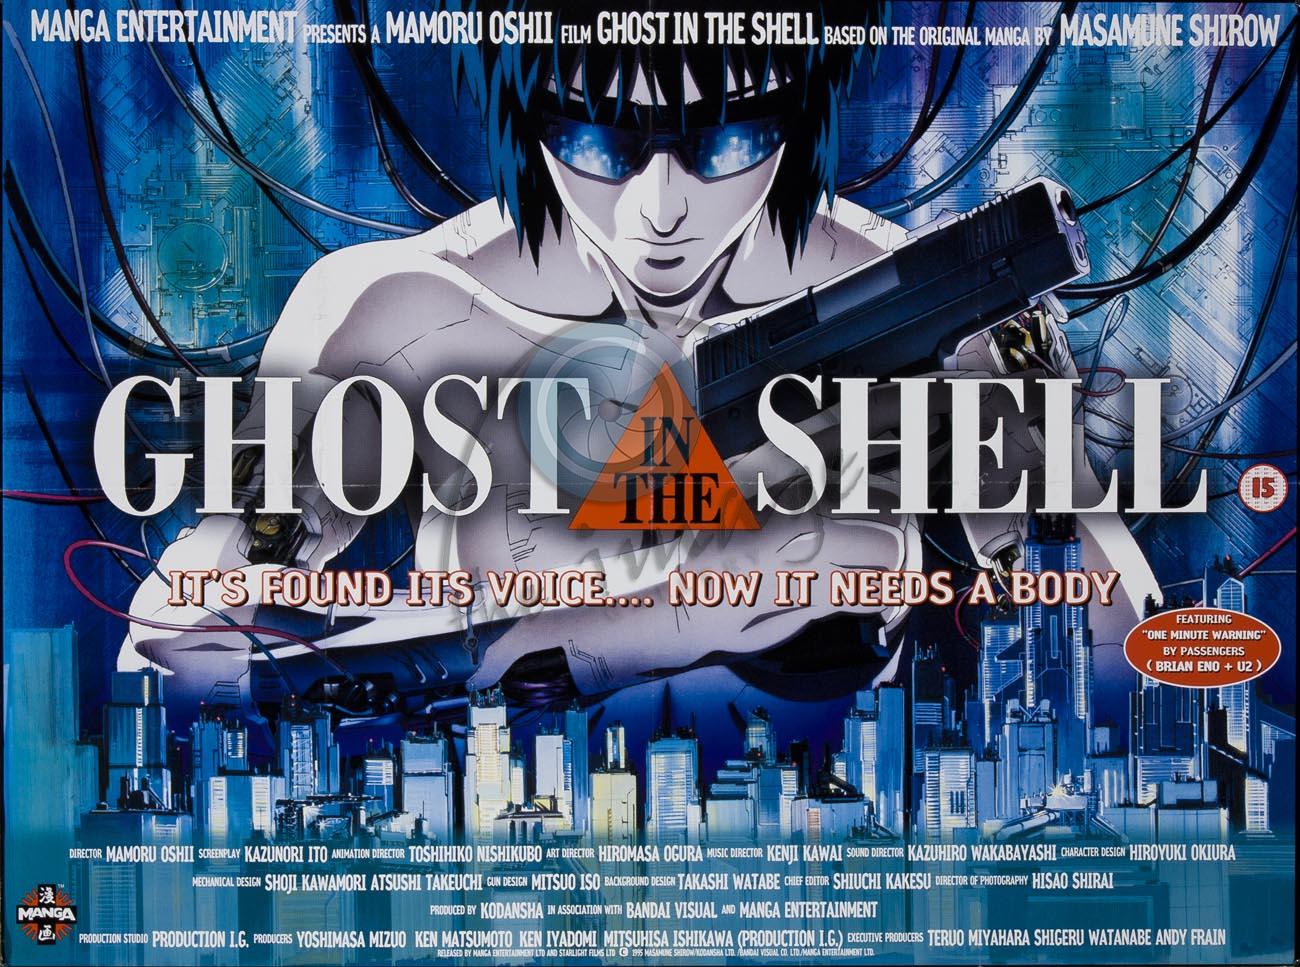 Remake of 'ghost in the shell'